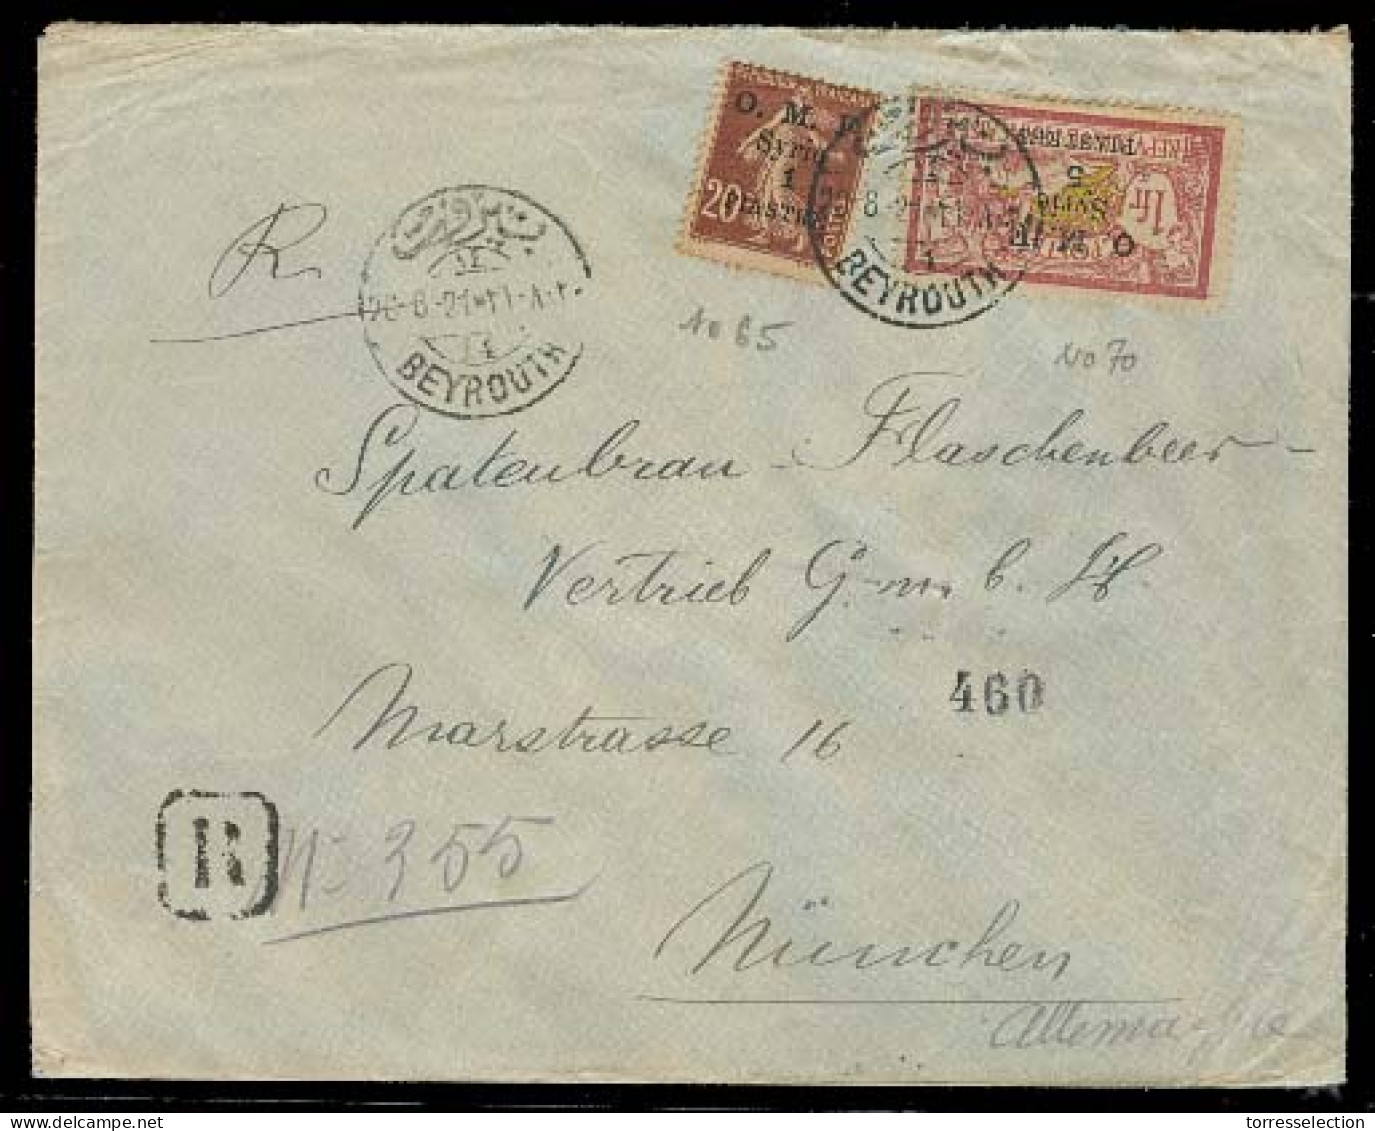 LEBANON. 1921. Beyrouth - Germany. Registered Fkd OMF / Syrie Env Incl SP + 1p. VF. - Liban